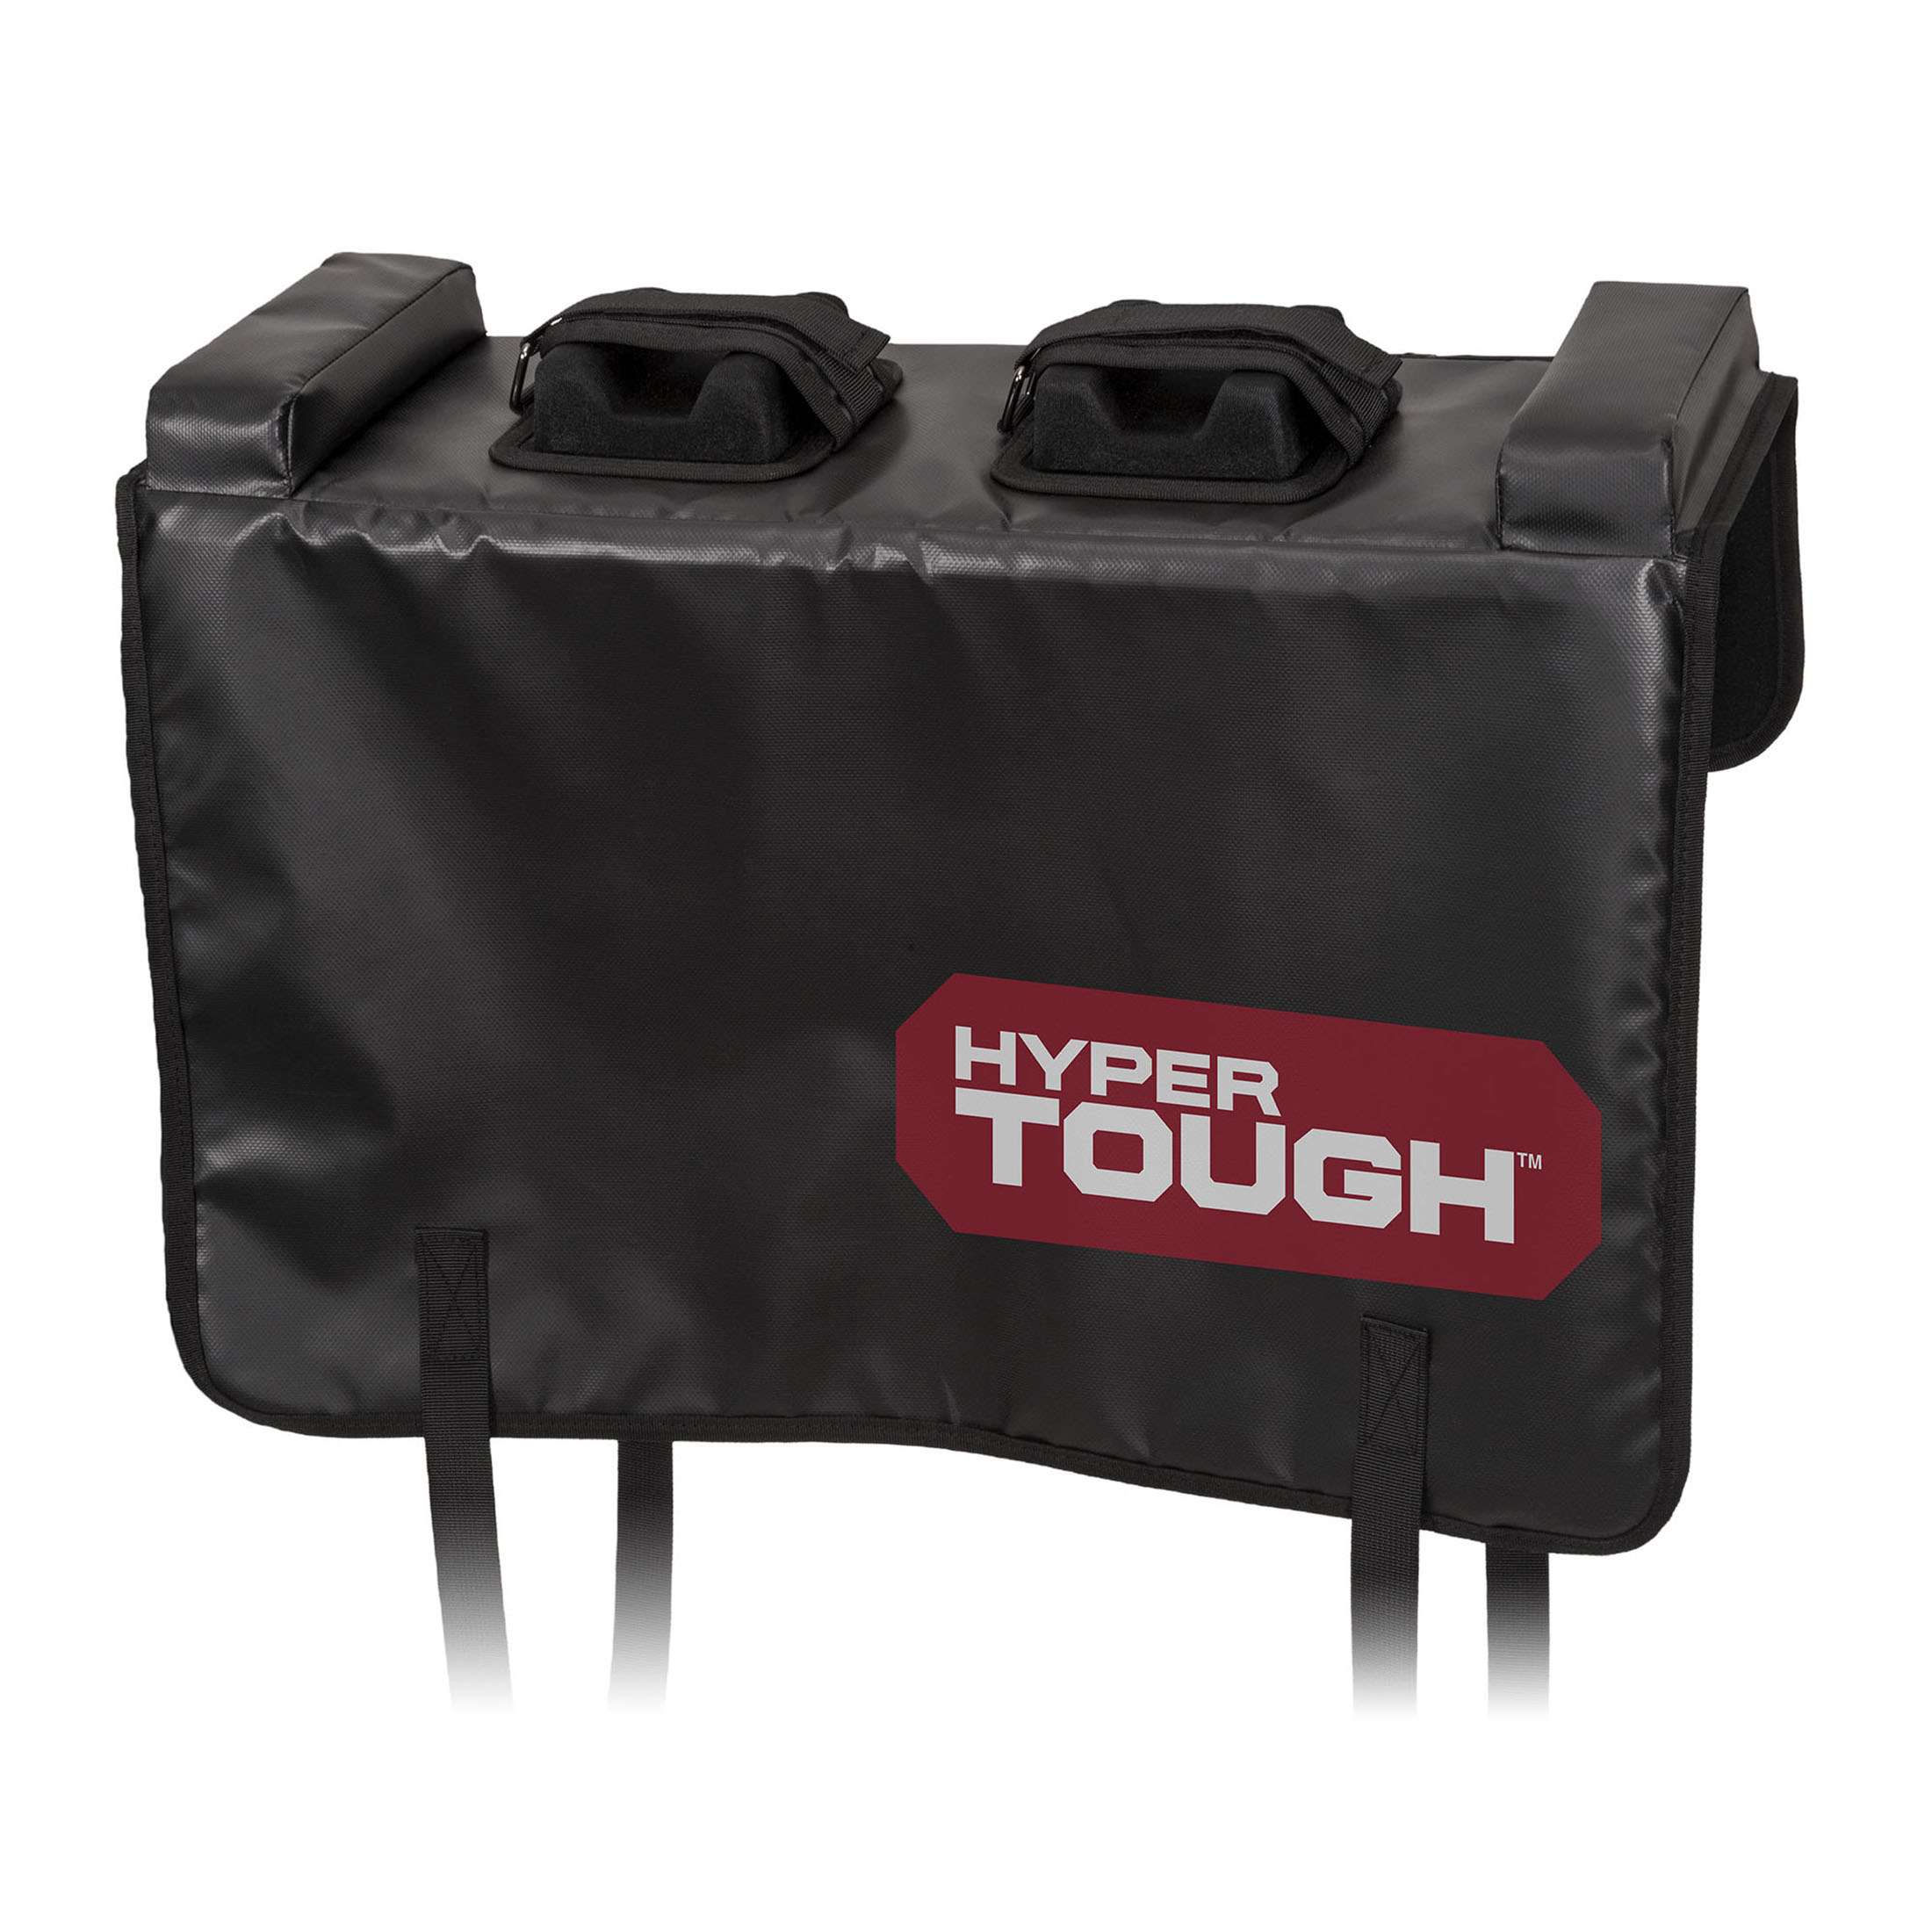 Hyper Tough Any Size Truck Tailgate Bike Rack Carrier Protection Pad (Fits 2 Bikes) $16.25 + Free Shipping w/ Walmart+ or Orders $35+